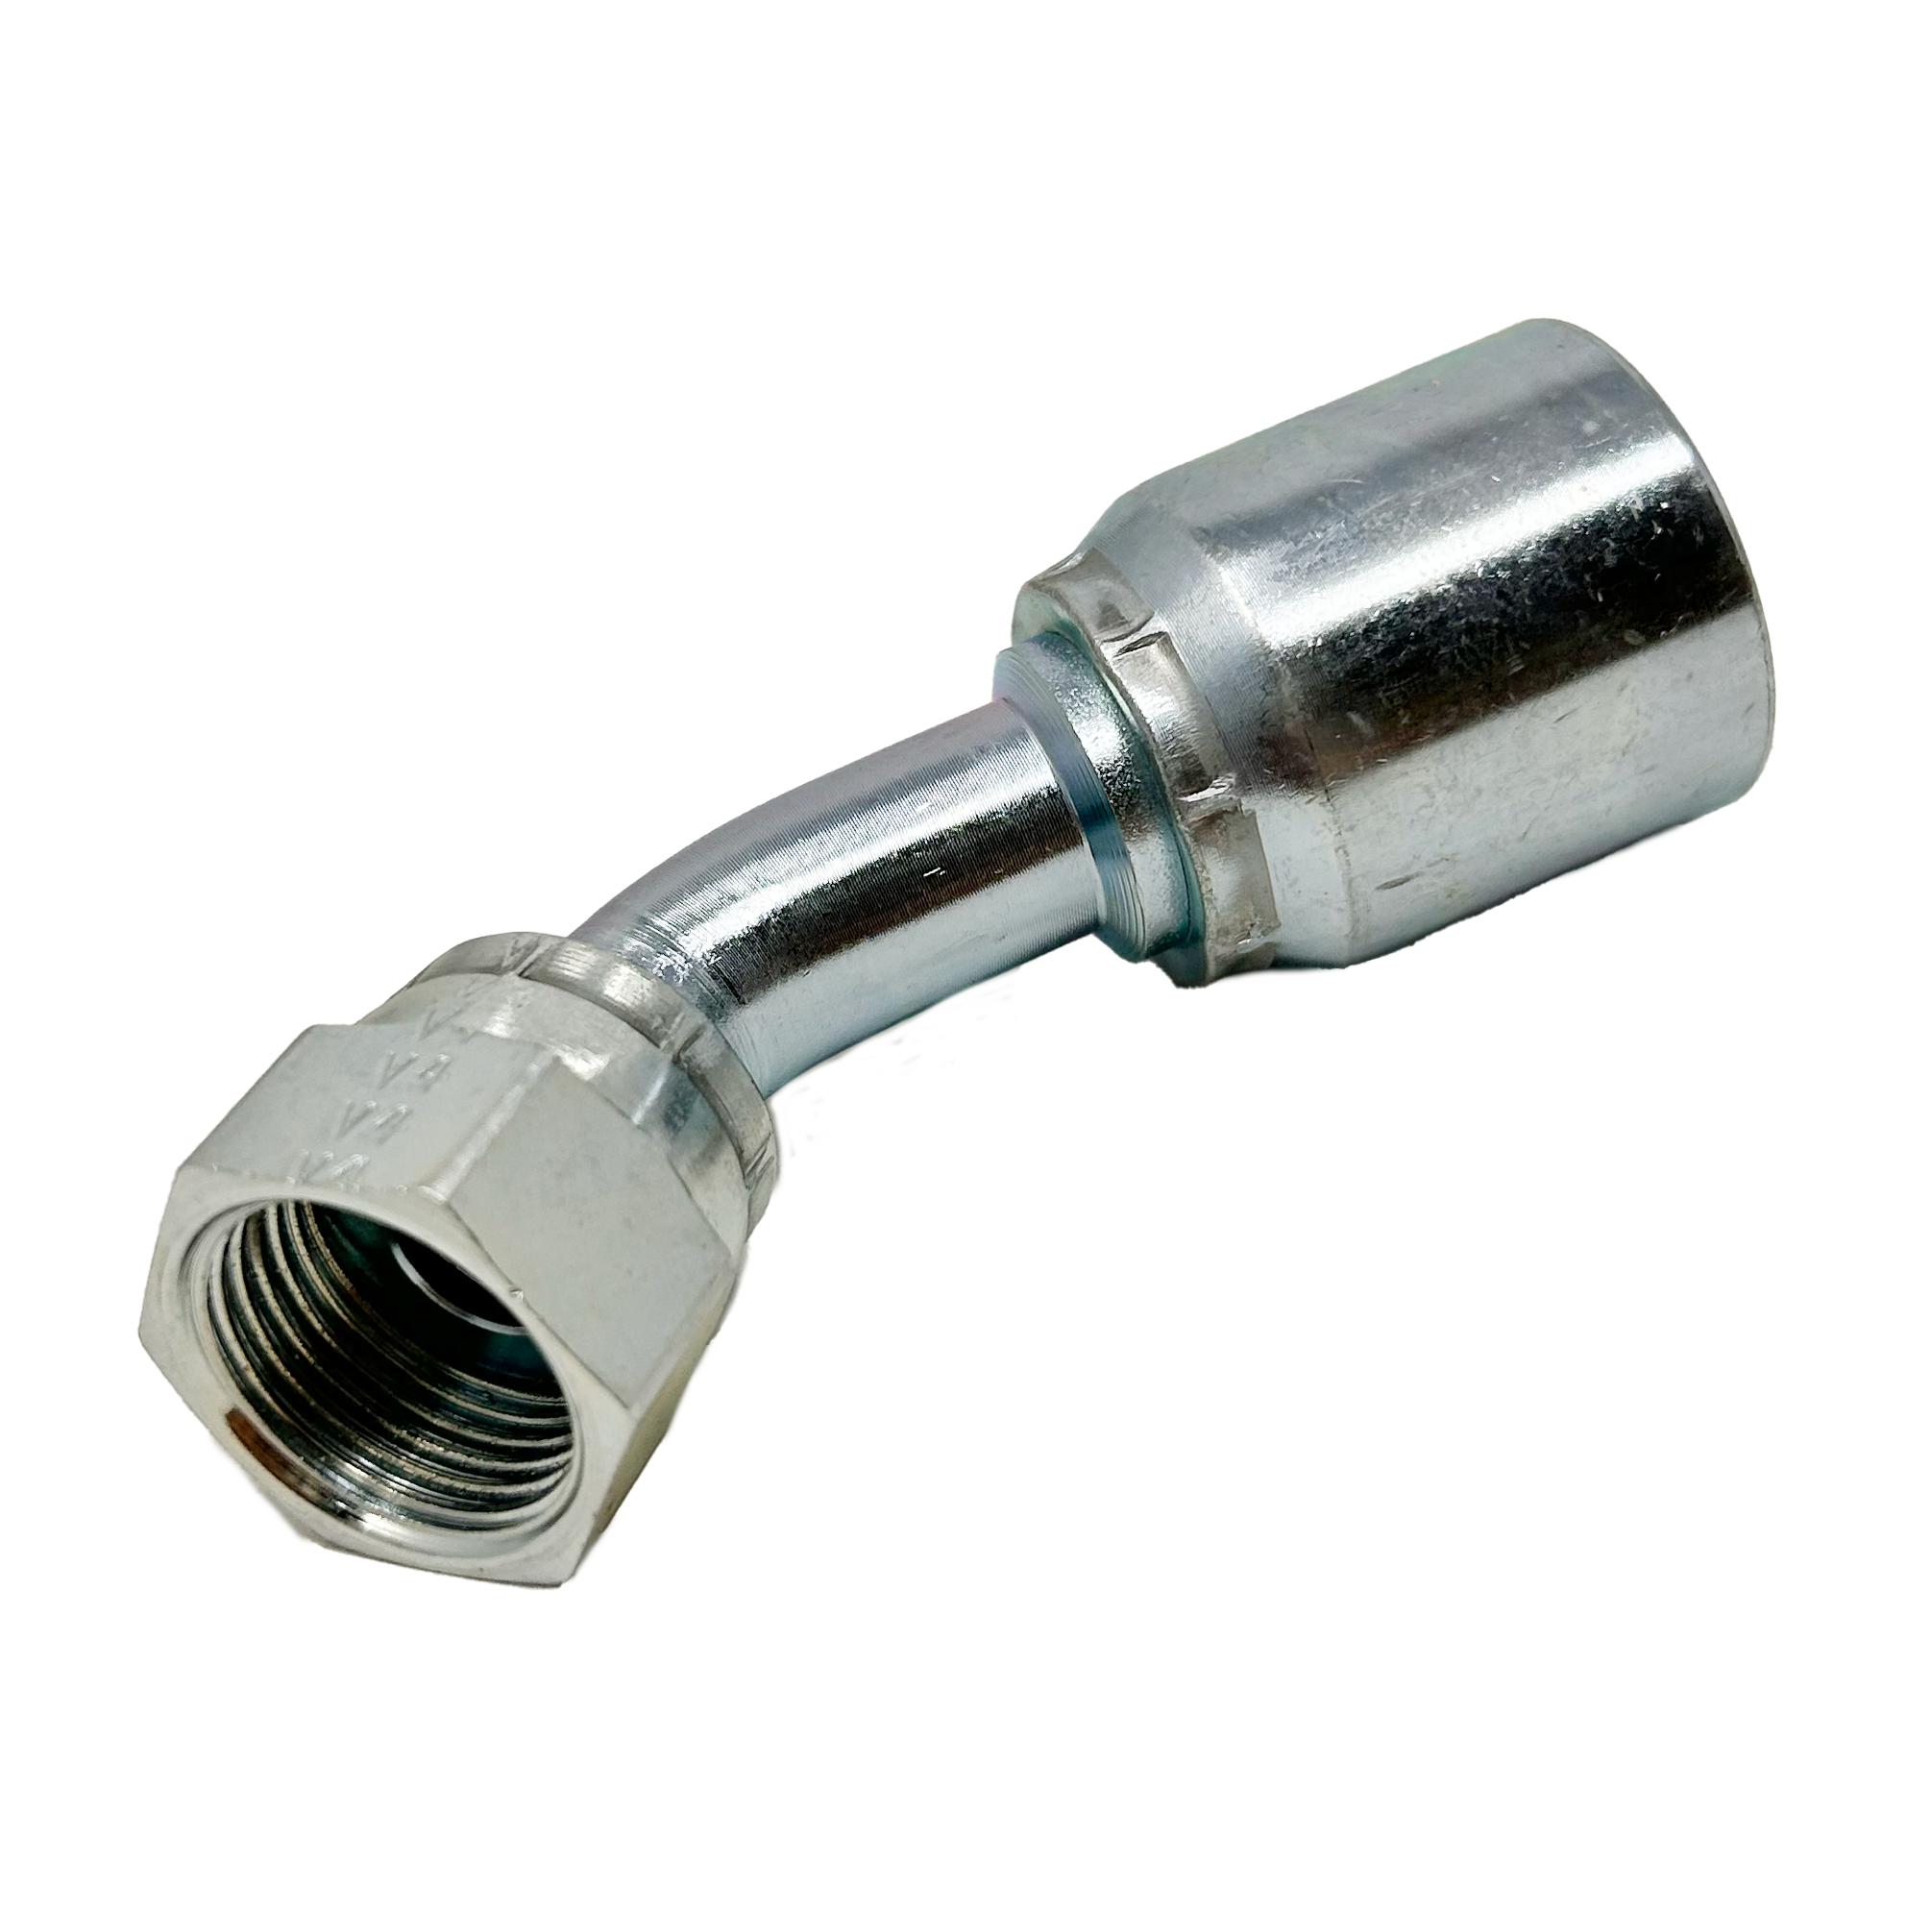 B2-OFFX45-0810: Continental Hose Fitting, 0.5 (1/2") Hose ID x 1-14 Female ORFS, 45-Degree Swivel Connection